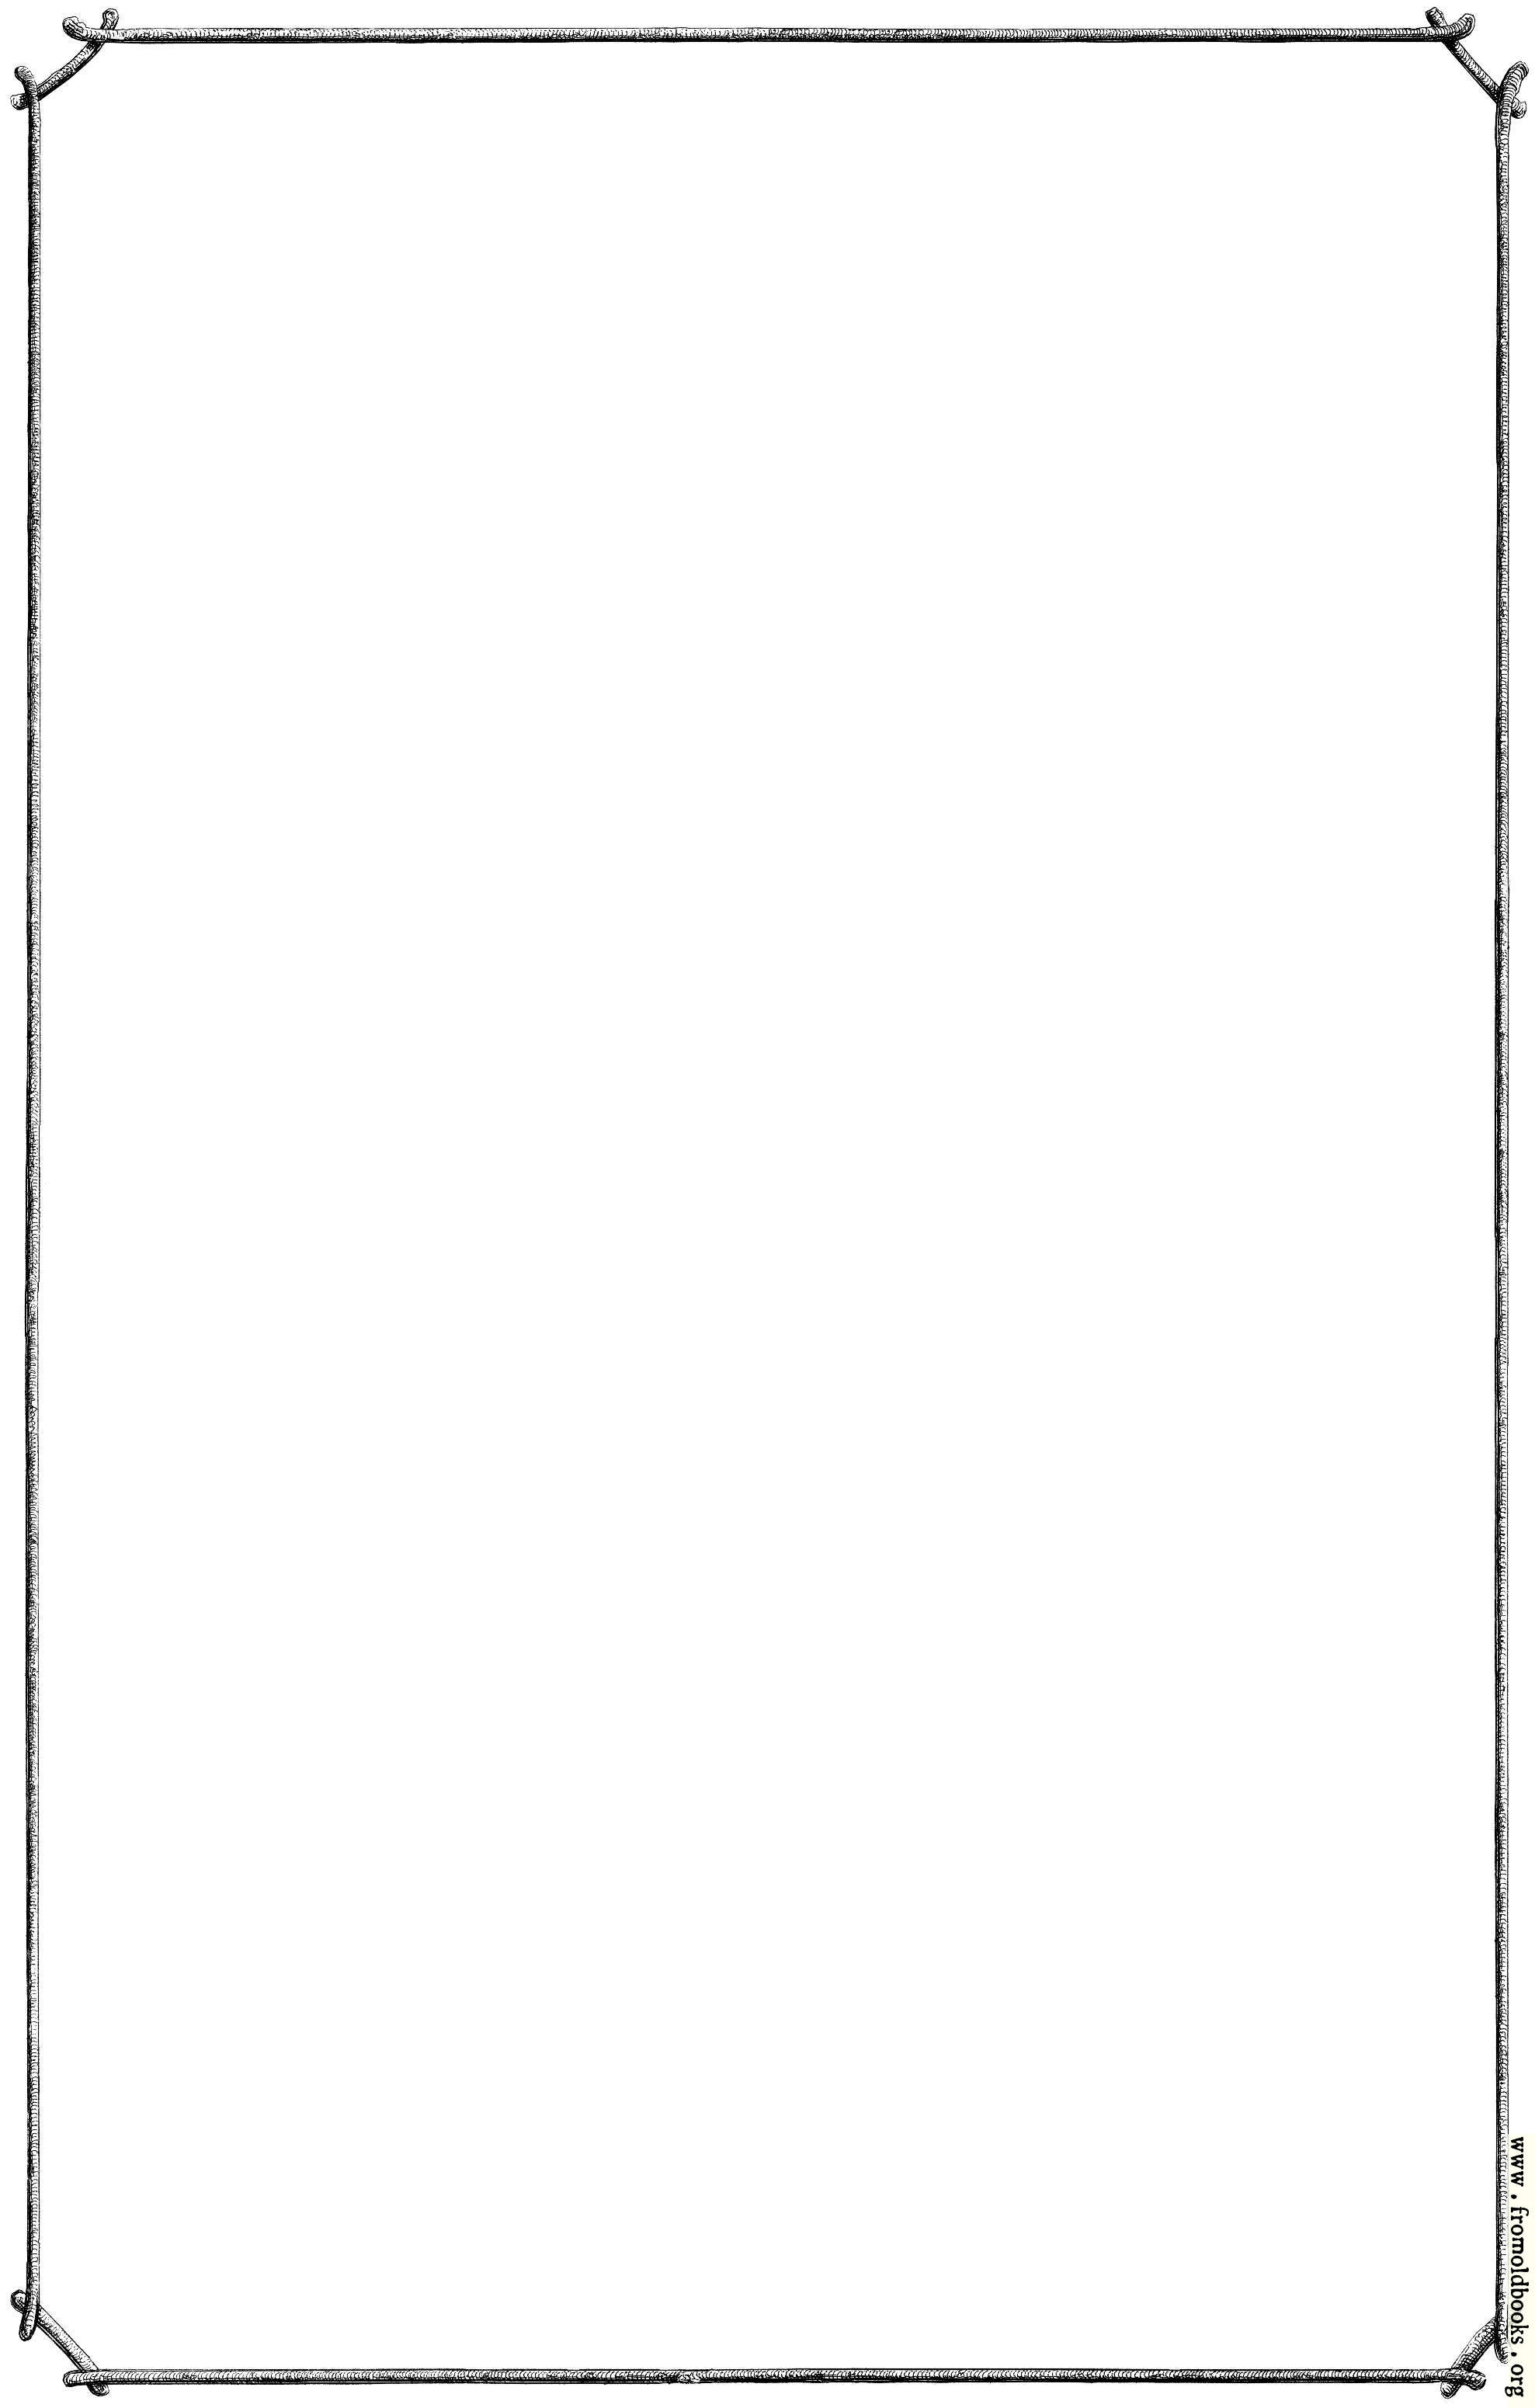 [Picture: Full-page simple border of twigs]